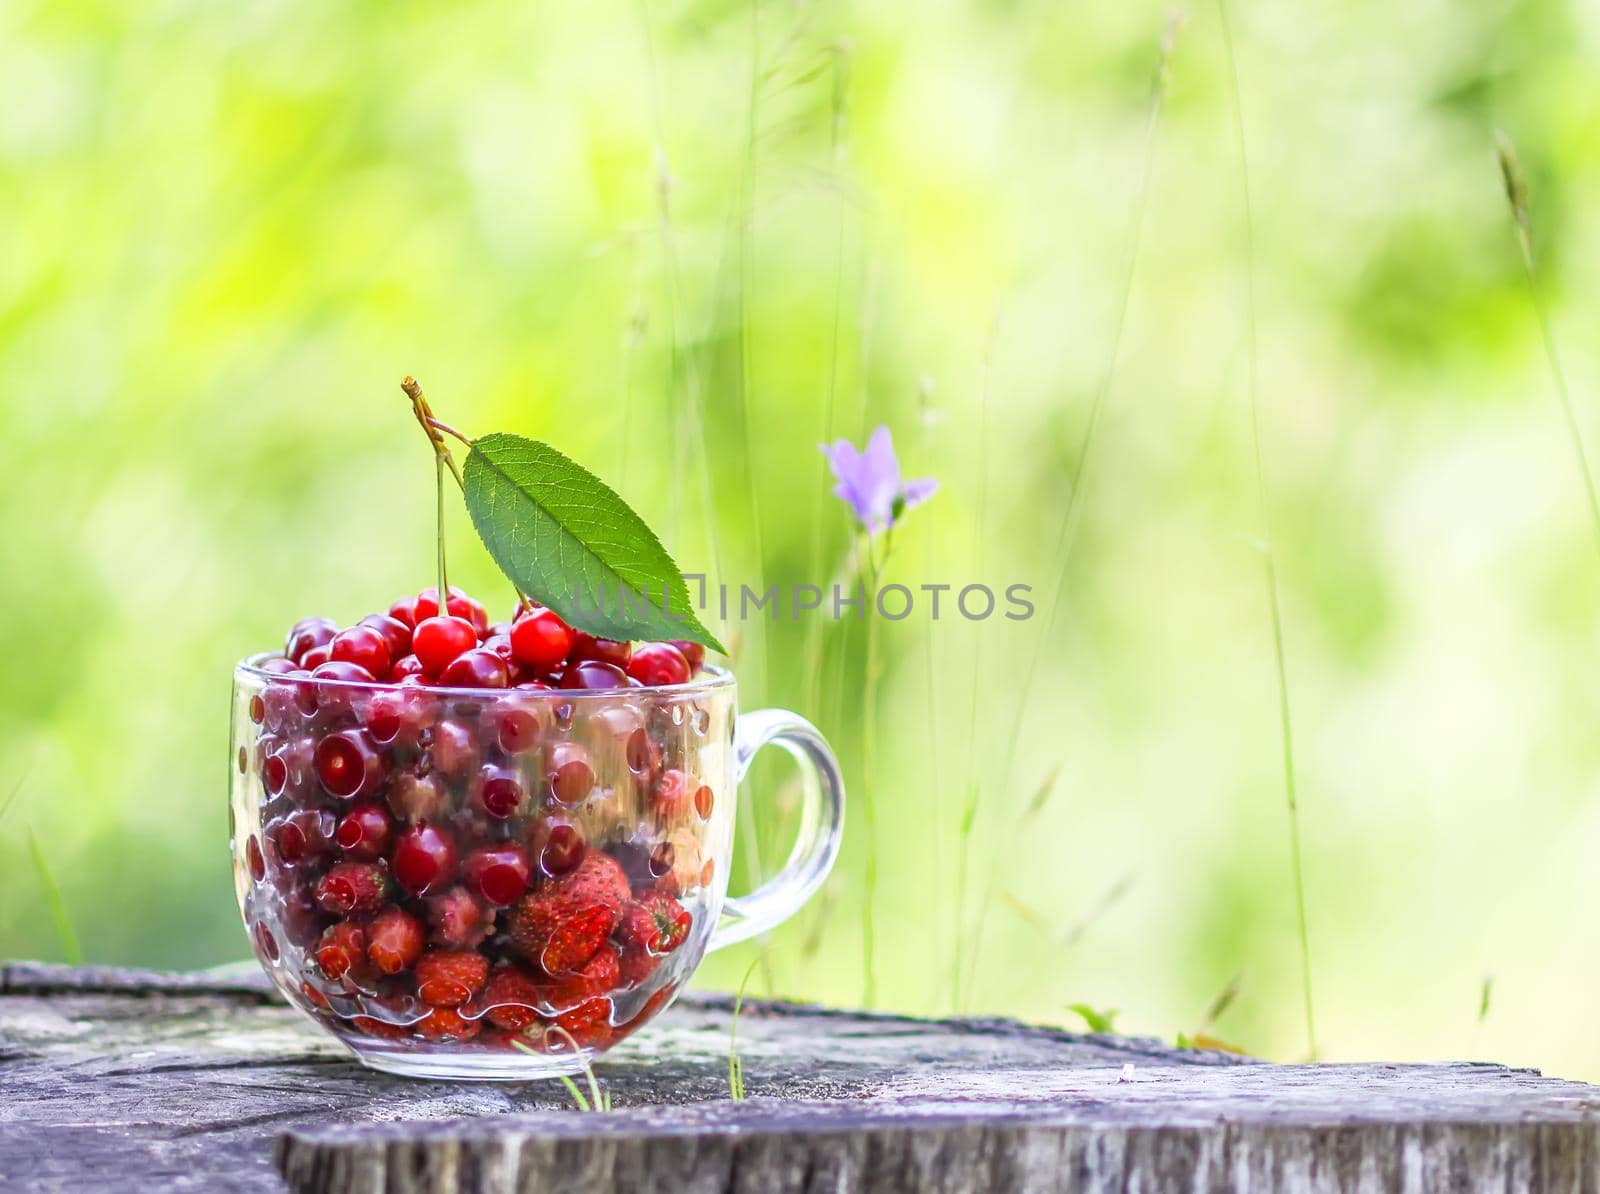 Ripe cherries and strawberries in a transparent cup on tree stump. Fresh red fruits in summer garden. by nightlyviolet